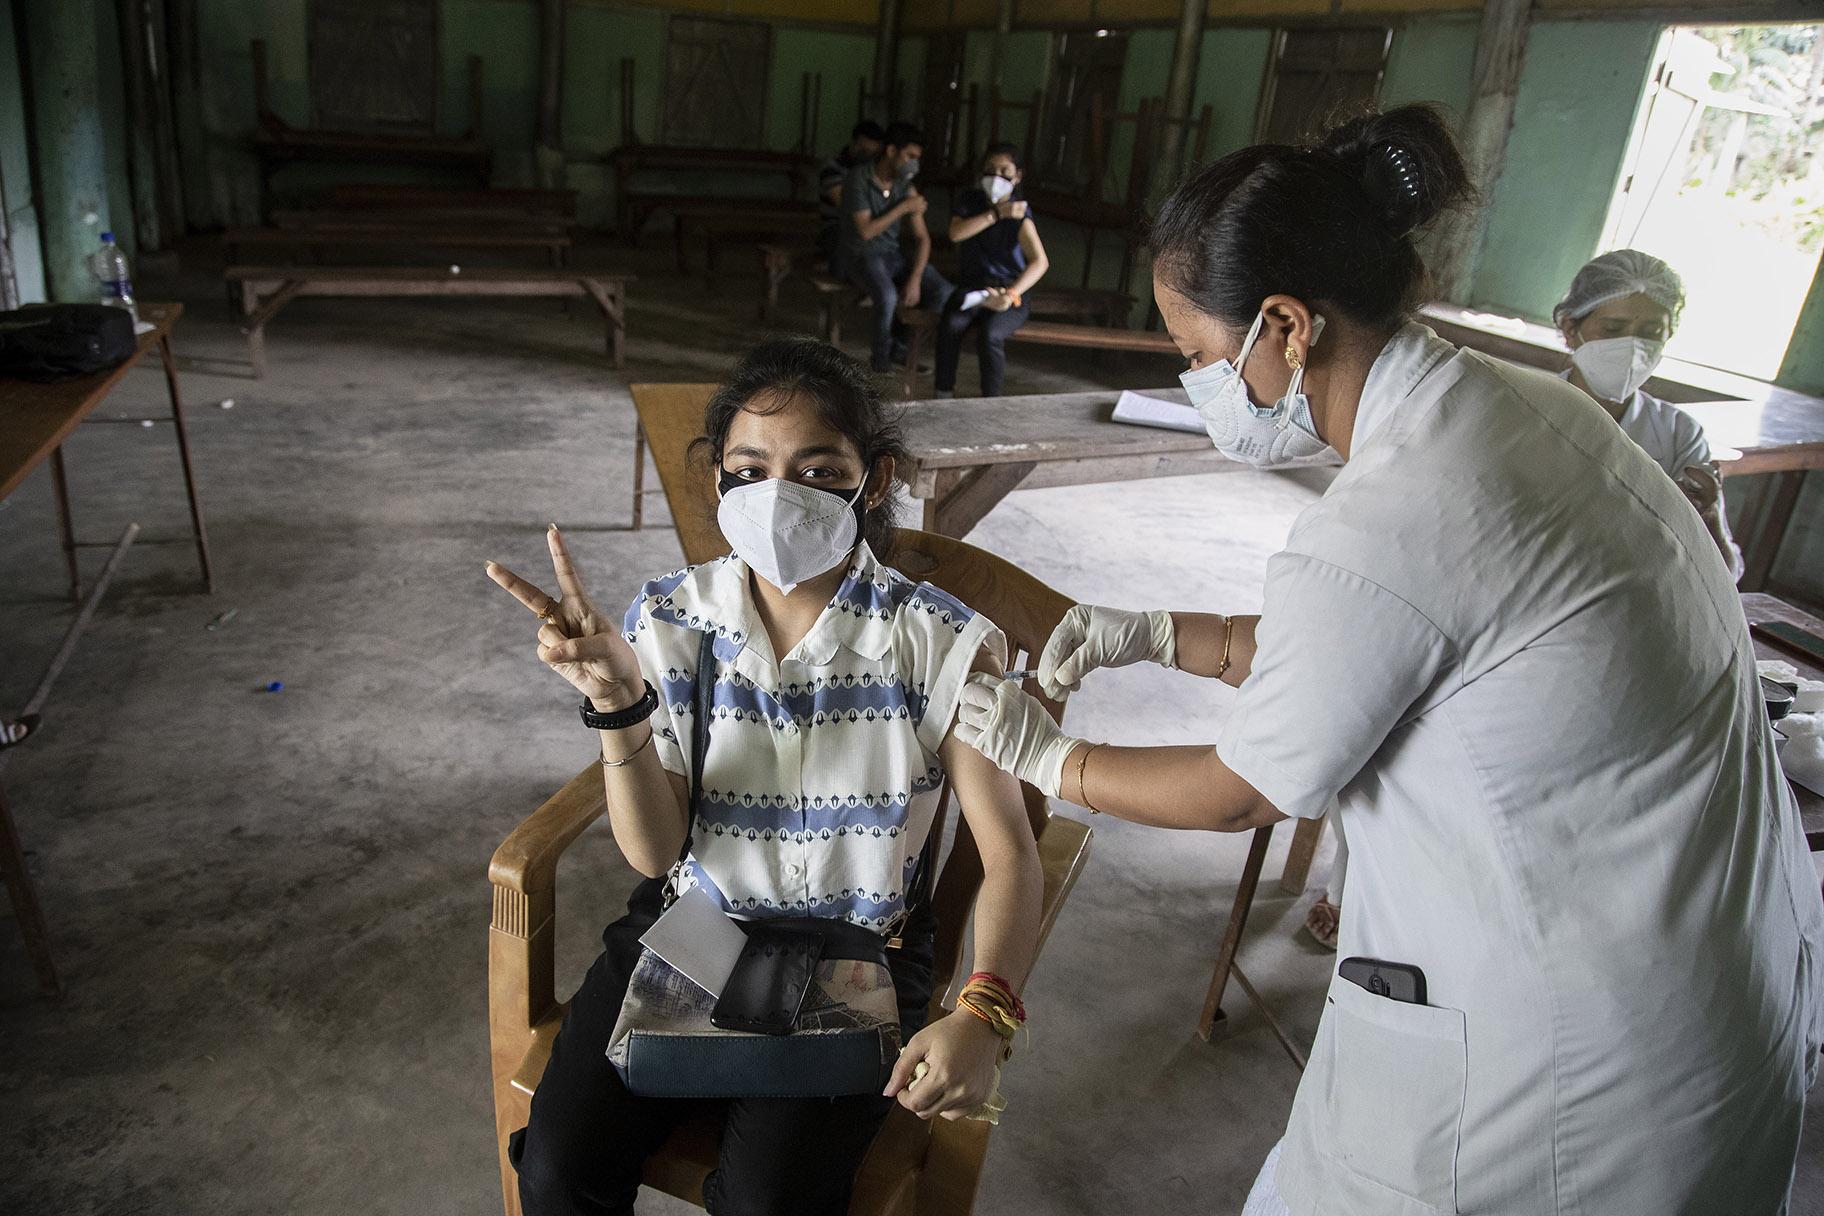 An Indian woman getting vaccinated with a dose of COVAXIN against the coronavirus gestures to camera in Gauhati, Assam, India, Monday, May 10, 2021. (AP Photo / Anupam Nath)